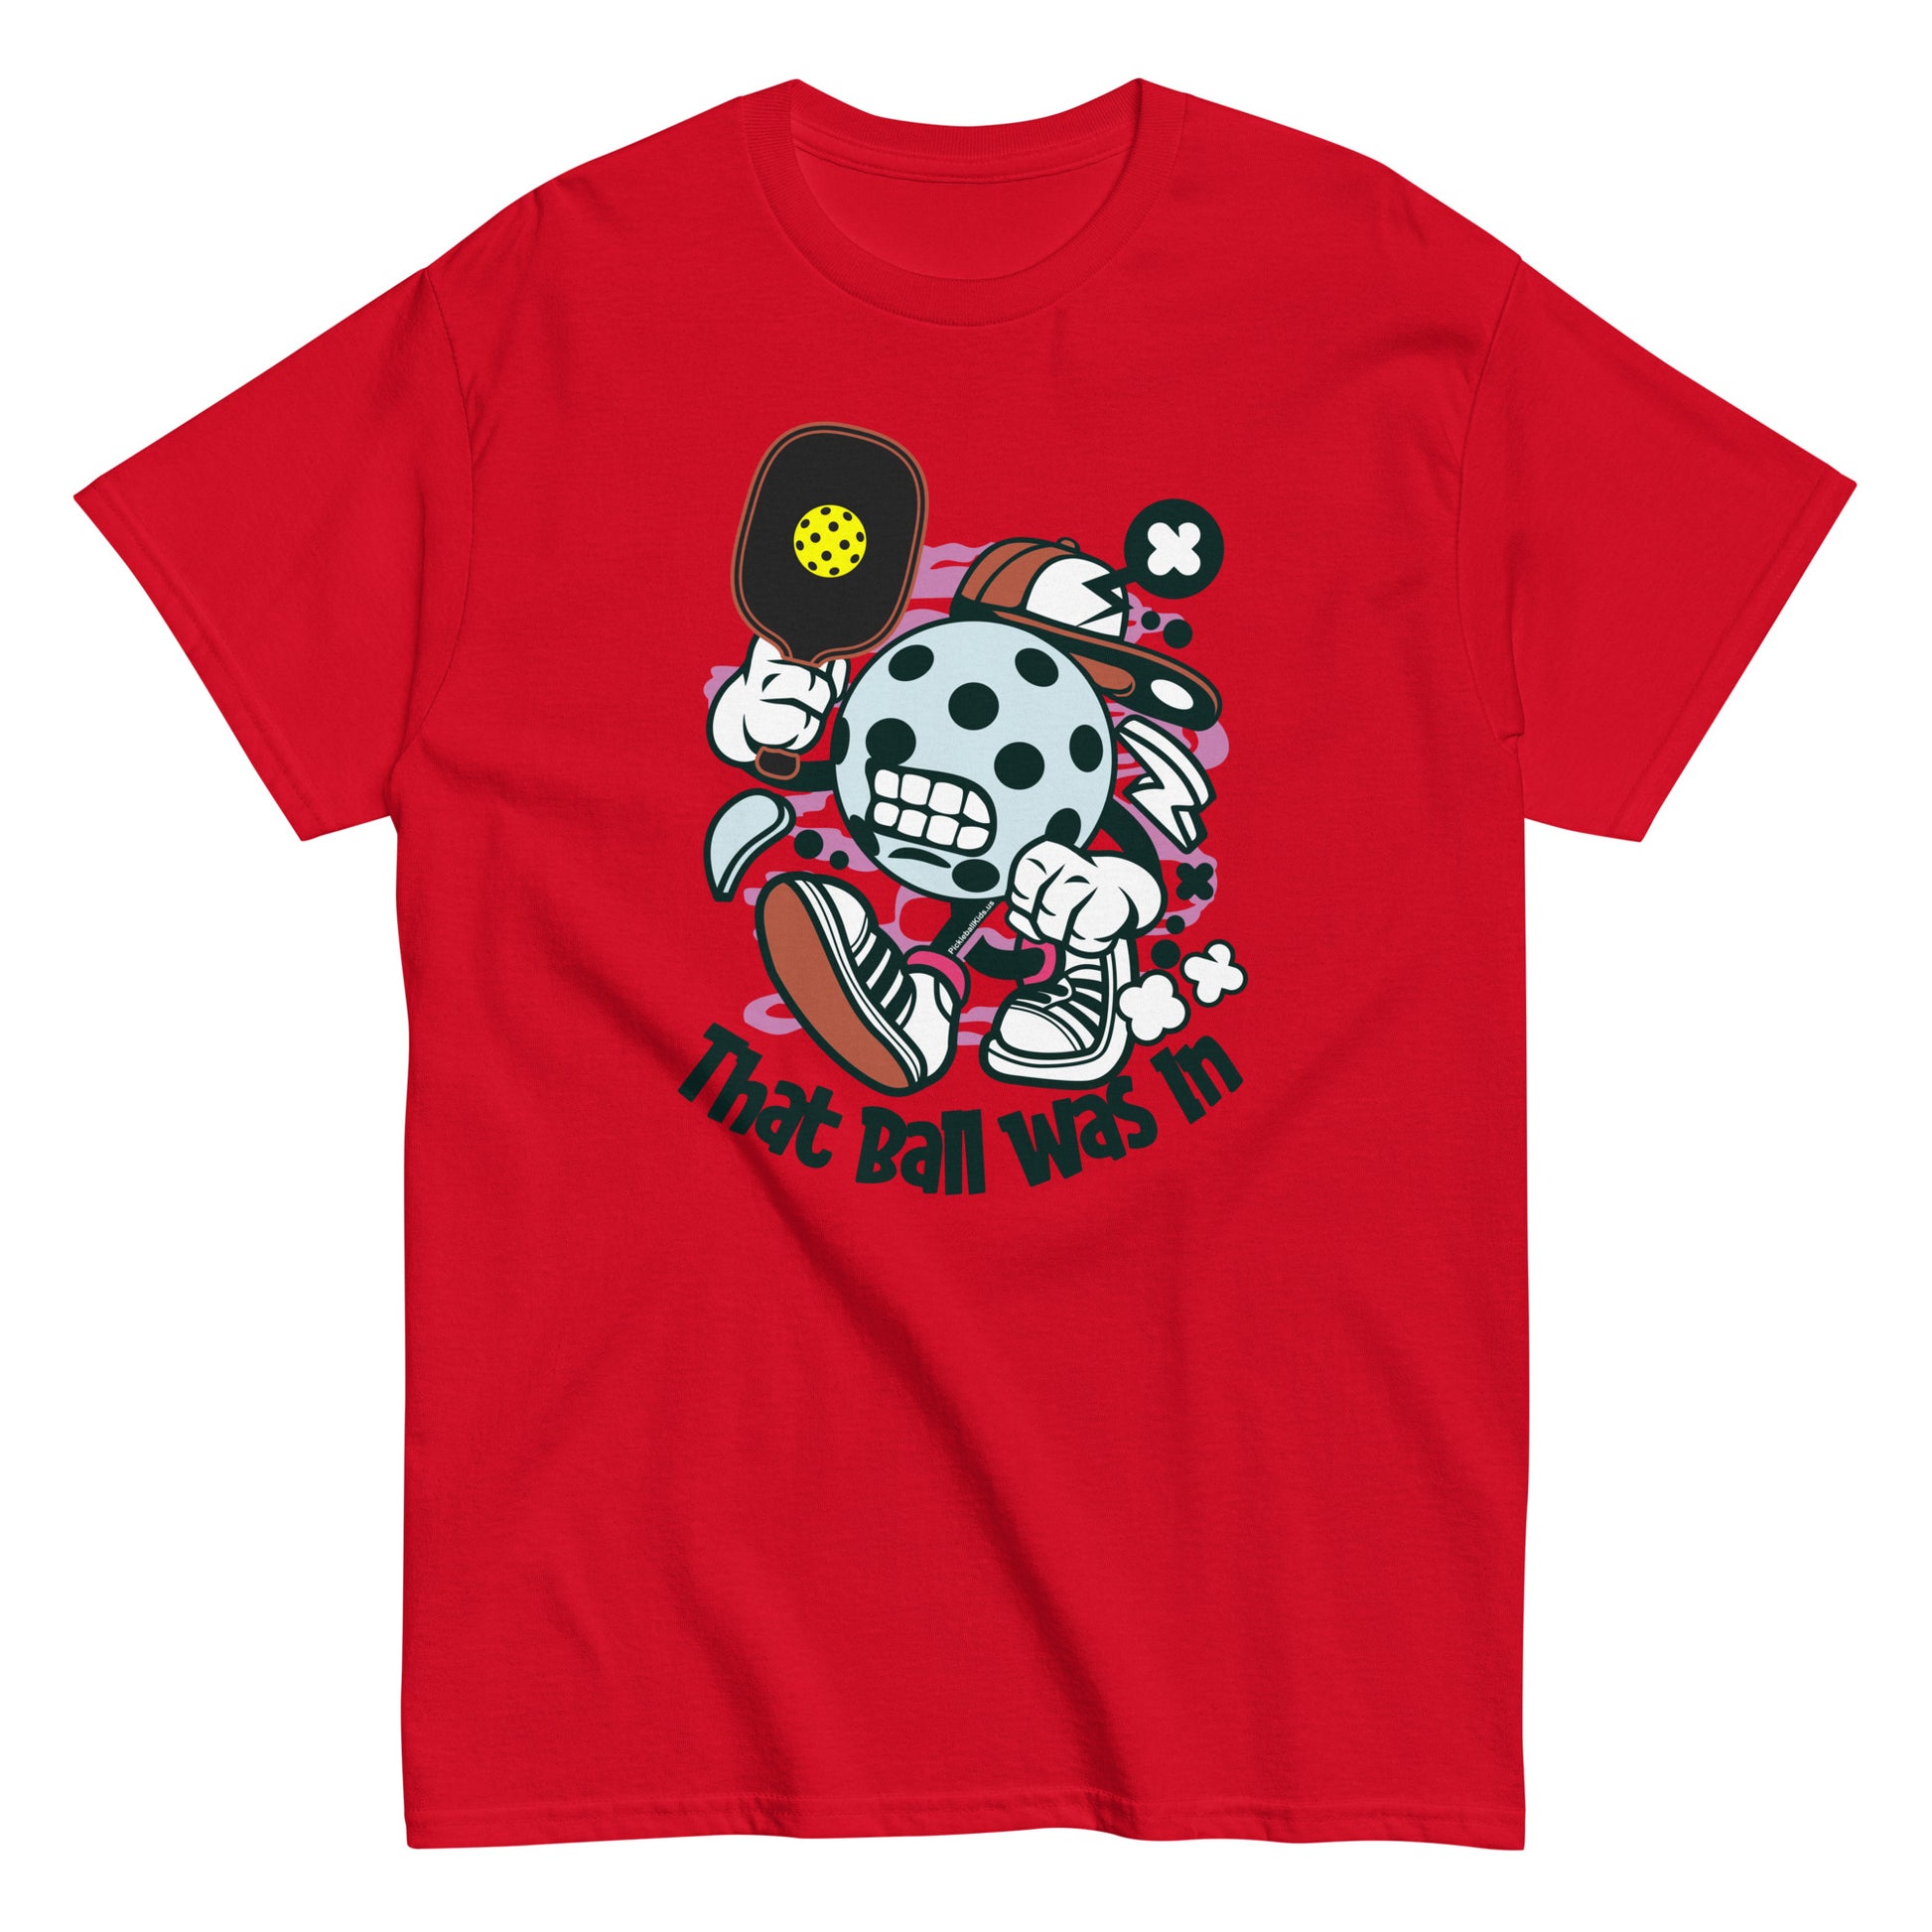 Retro Fun Pickleball "That Ball Was In" Men's Red T-Shirt